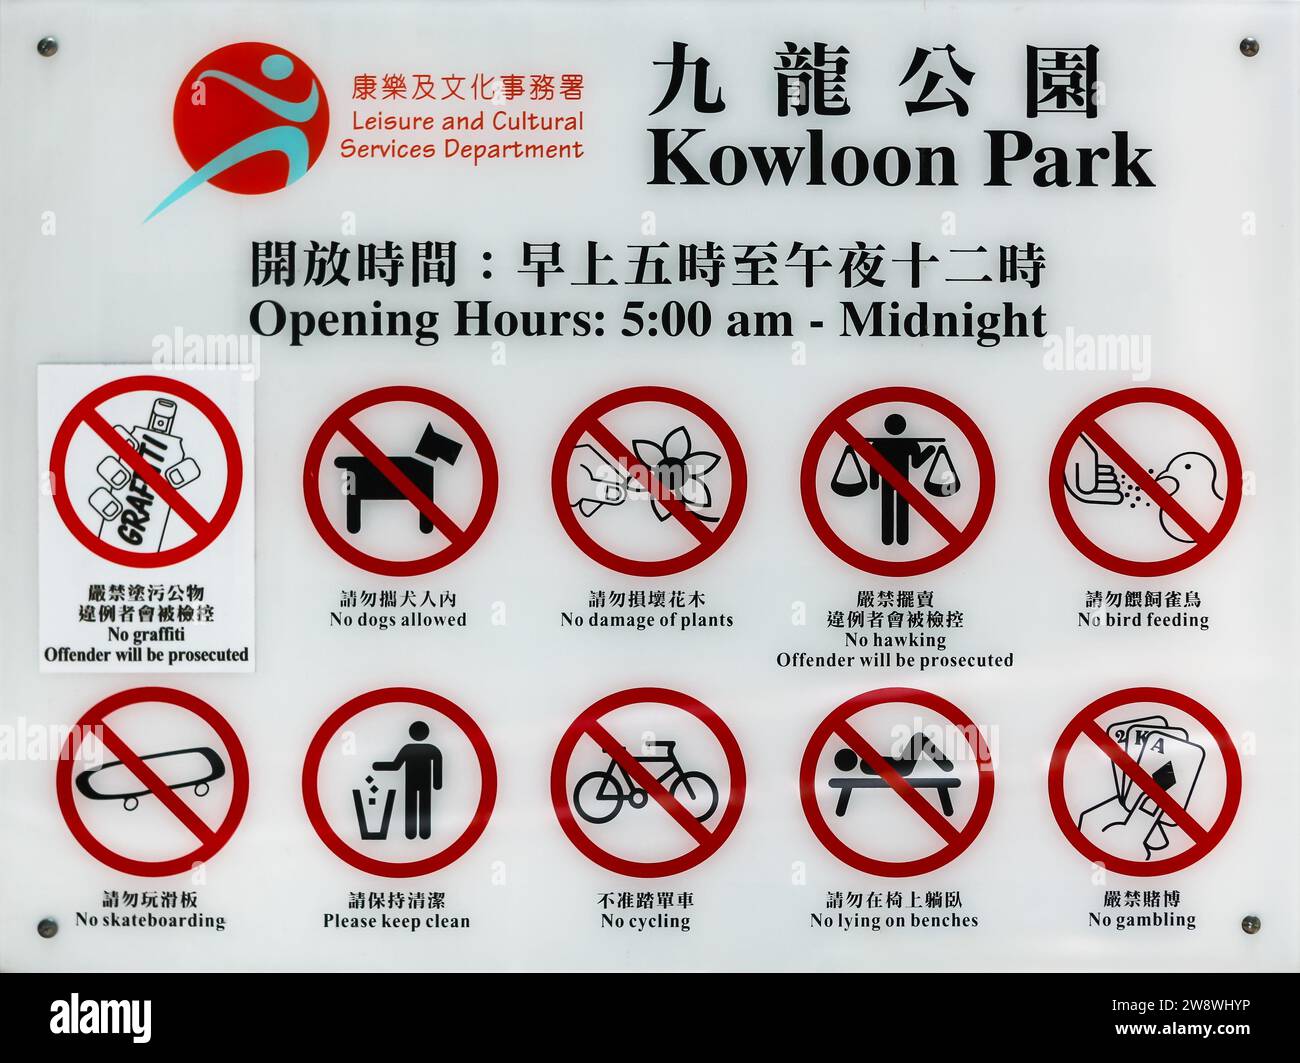 Hong Kong, China - July 23, 2009 : Sign outside Kowloon Park with opening hours and regulations. Conditions for entry to the central park of Hong Kong. Stock Photo